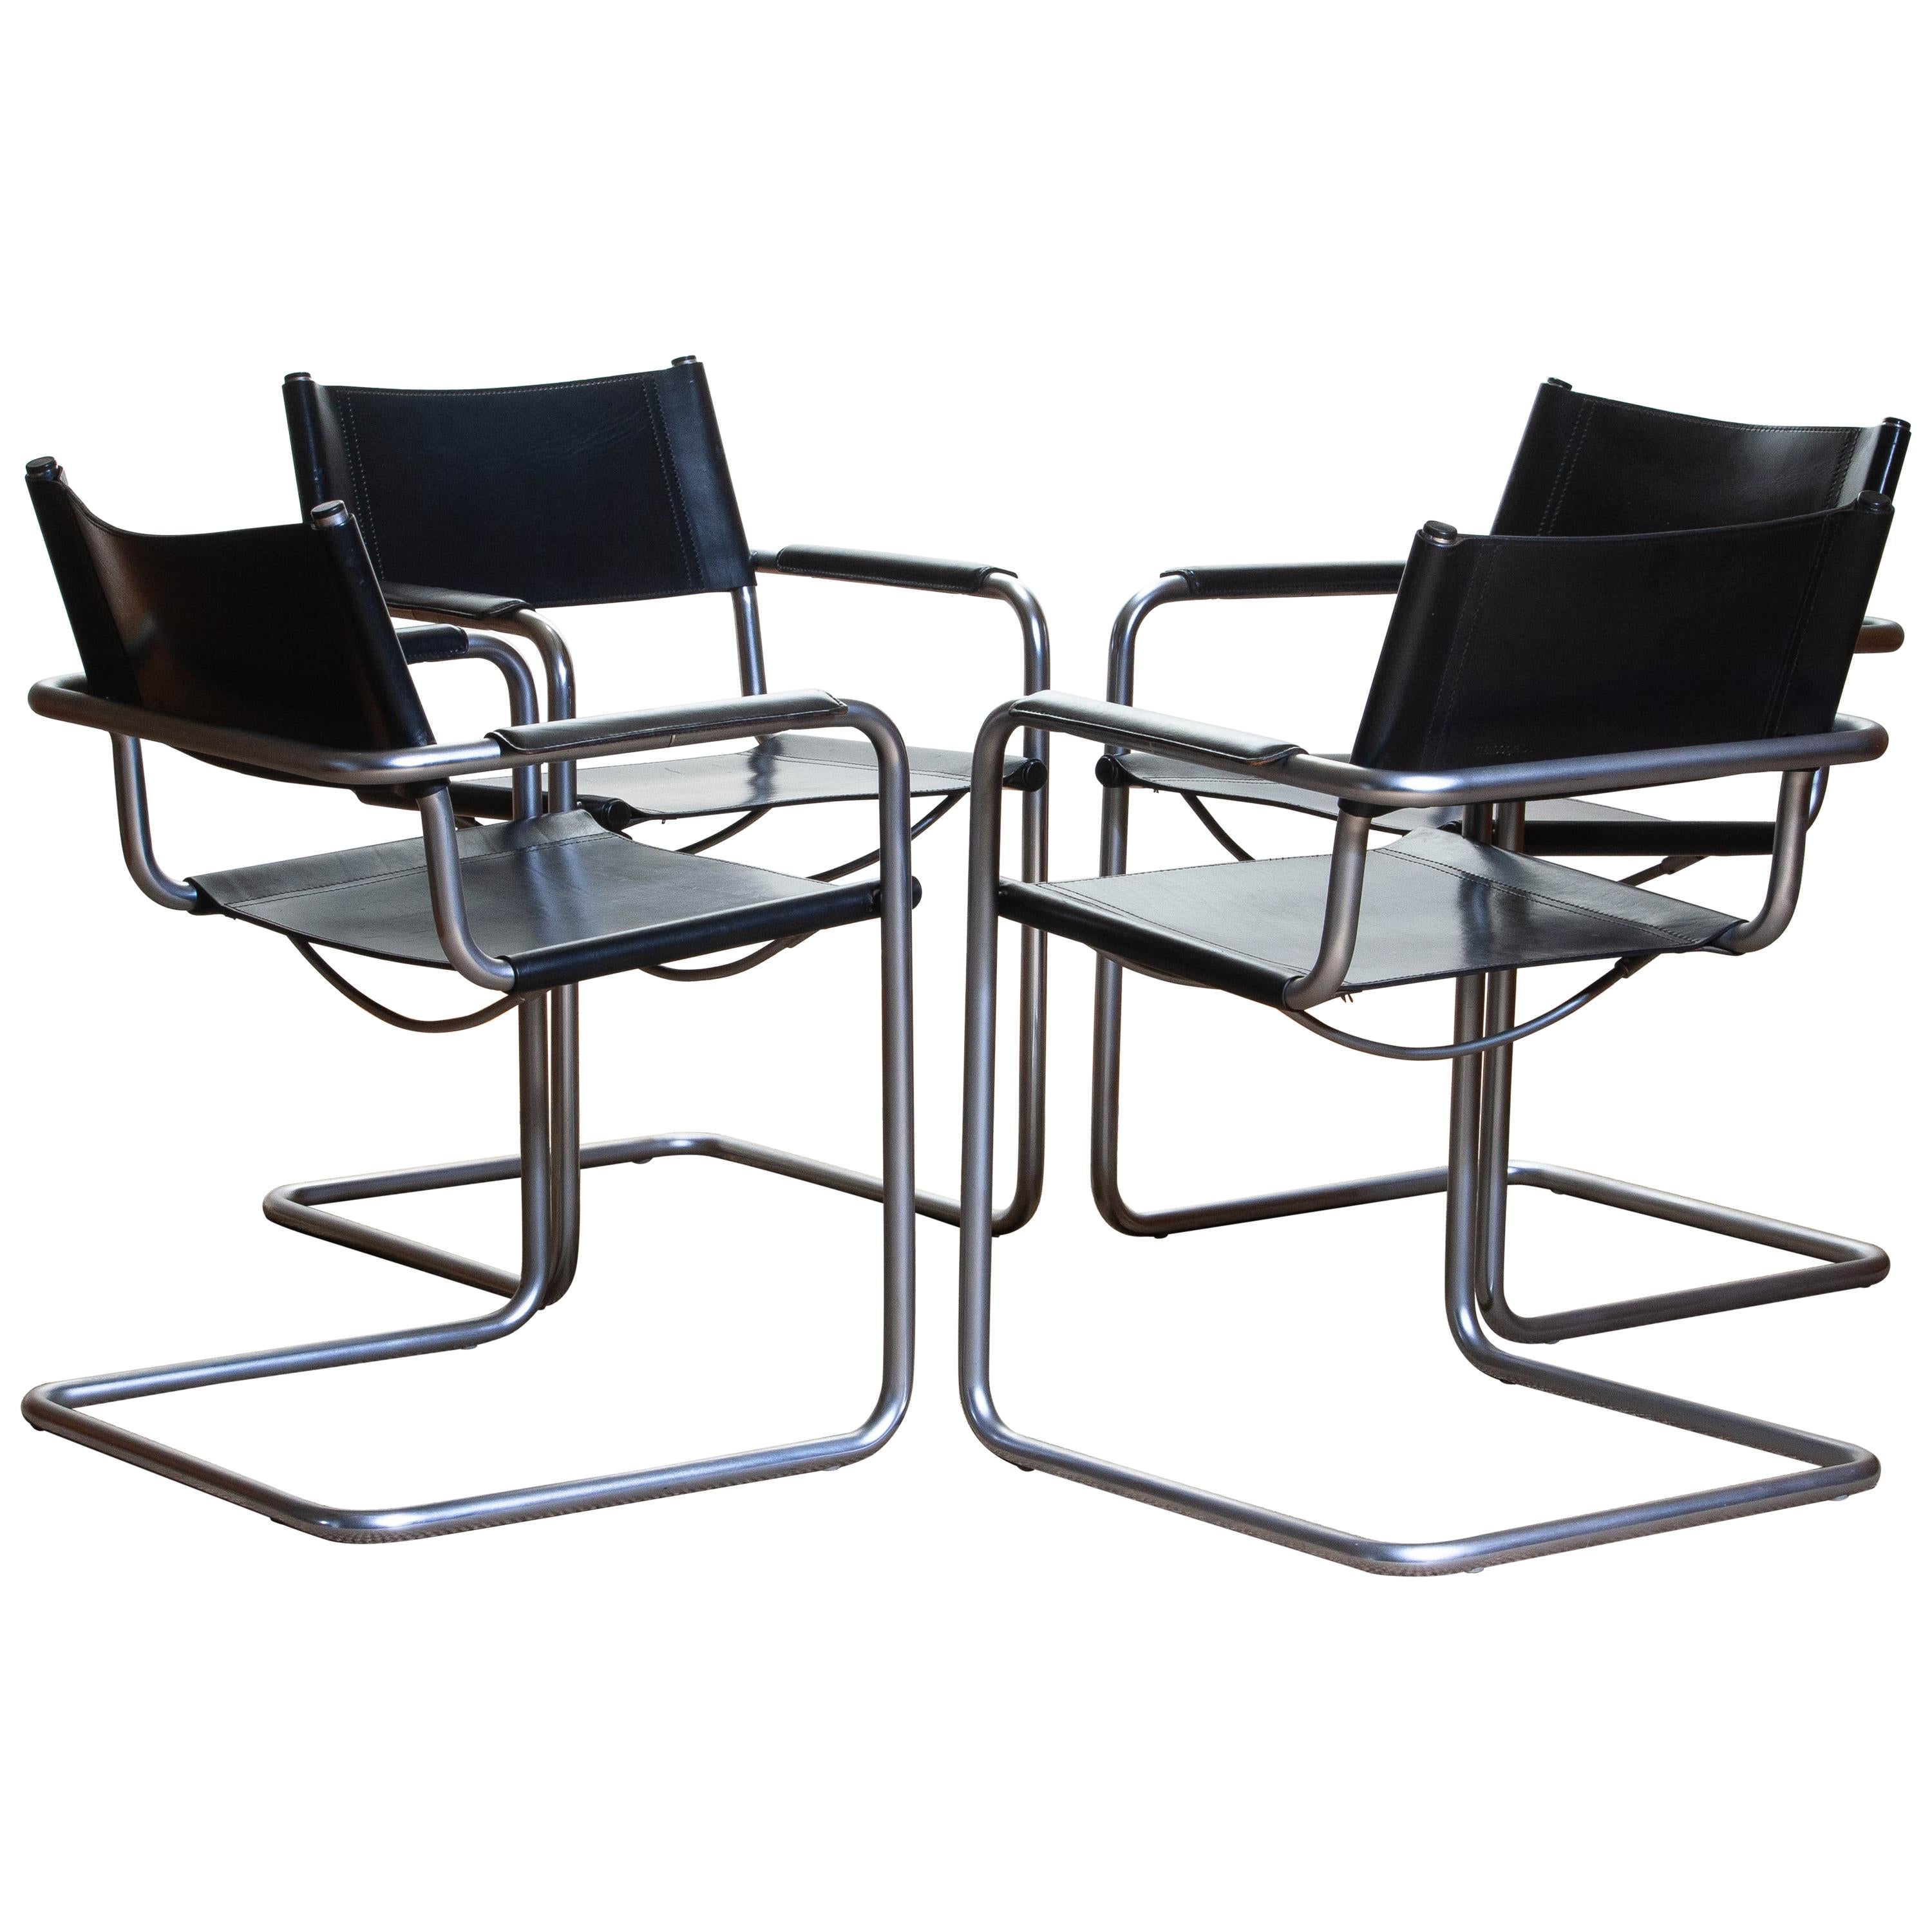 Mid-Century Modern 1970s, Set of Four MG5 Black Leather Dining or Office Chairs by Matteo Grassi